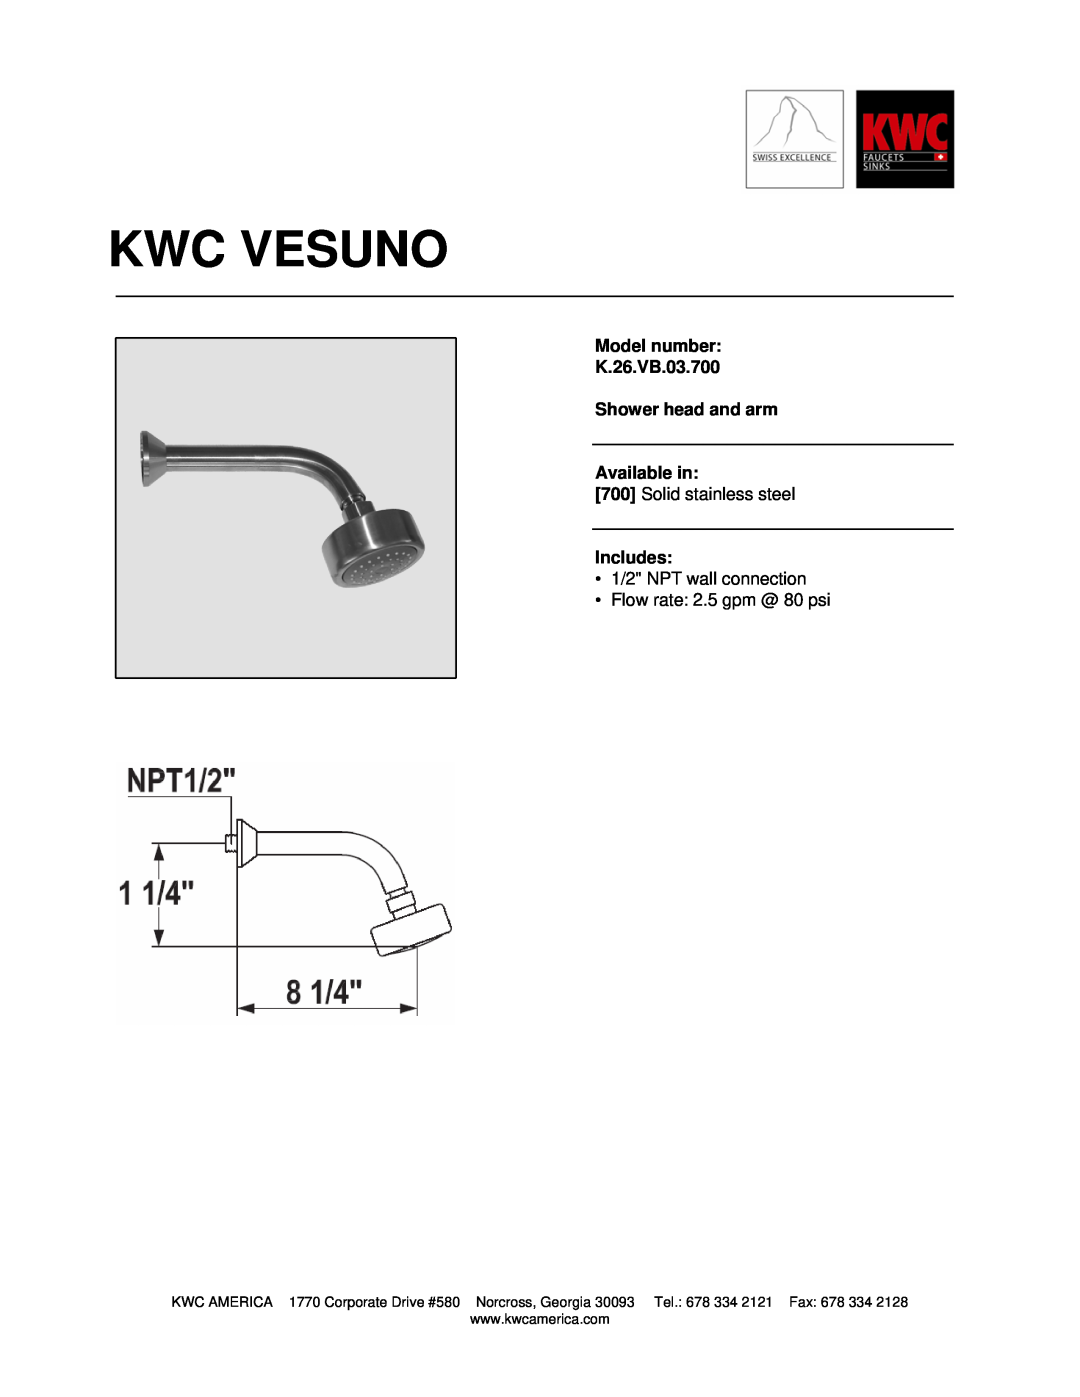 KWC manual Kwc Vesuno, Model number K.26.VB.03.700 Shower head and arm, Available in, Solid stainless steel, Includes 